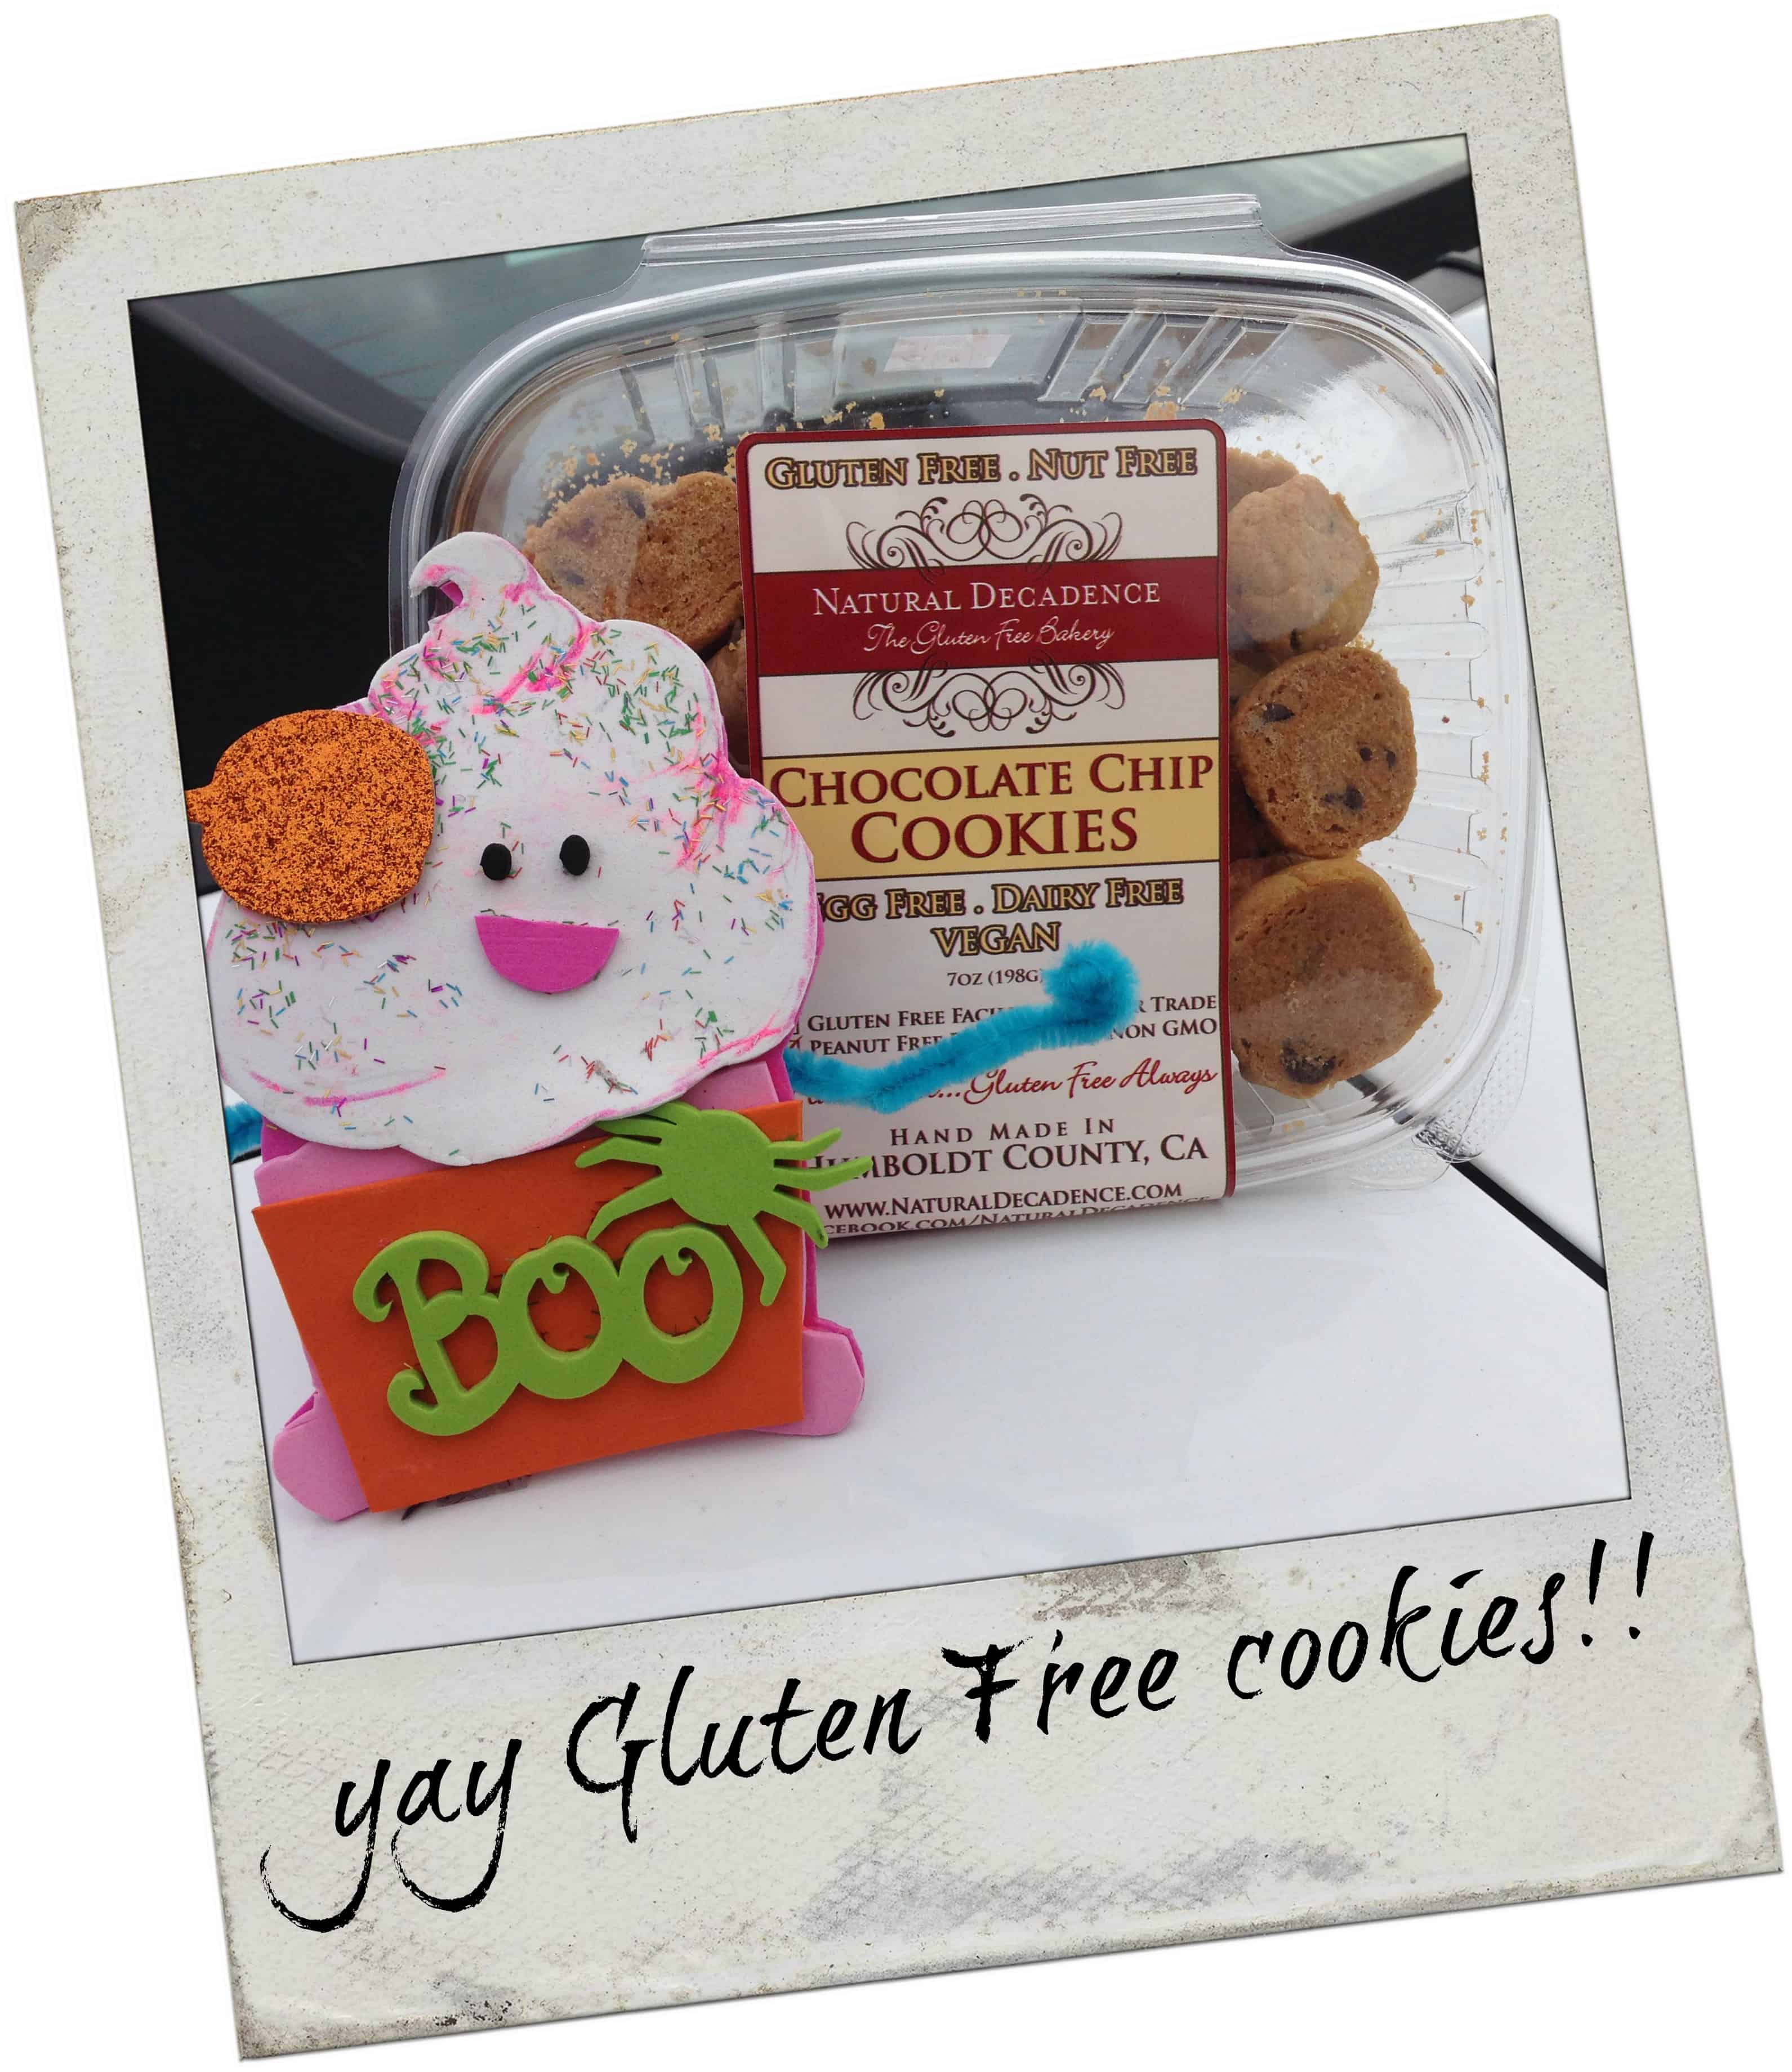 know gluten in Northern California - Gluten free chocolate chip cookies from Natural Decadence in Eureka. Amazing!